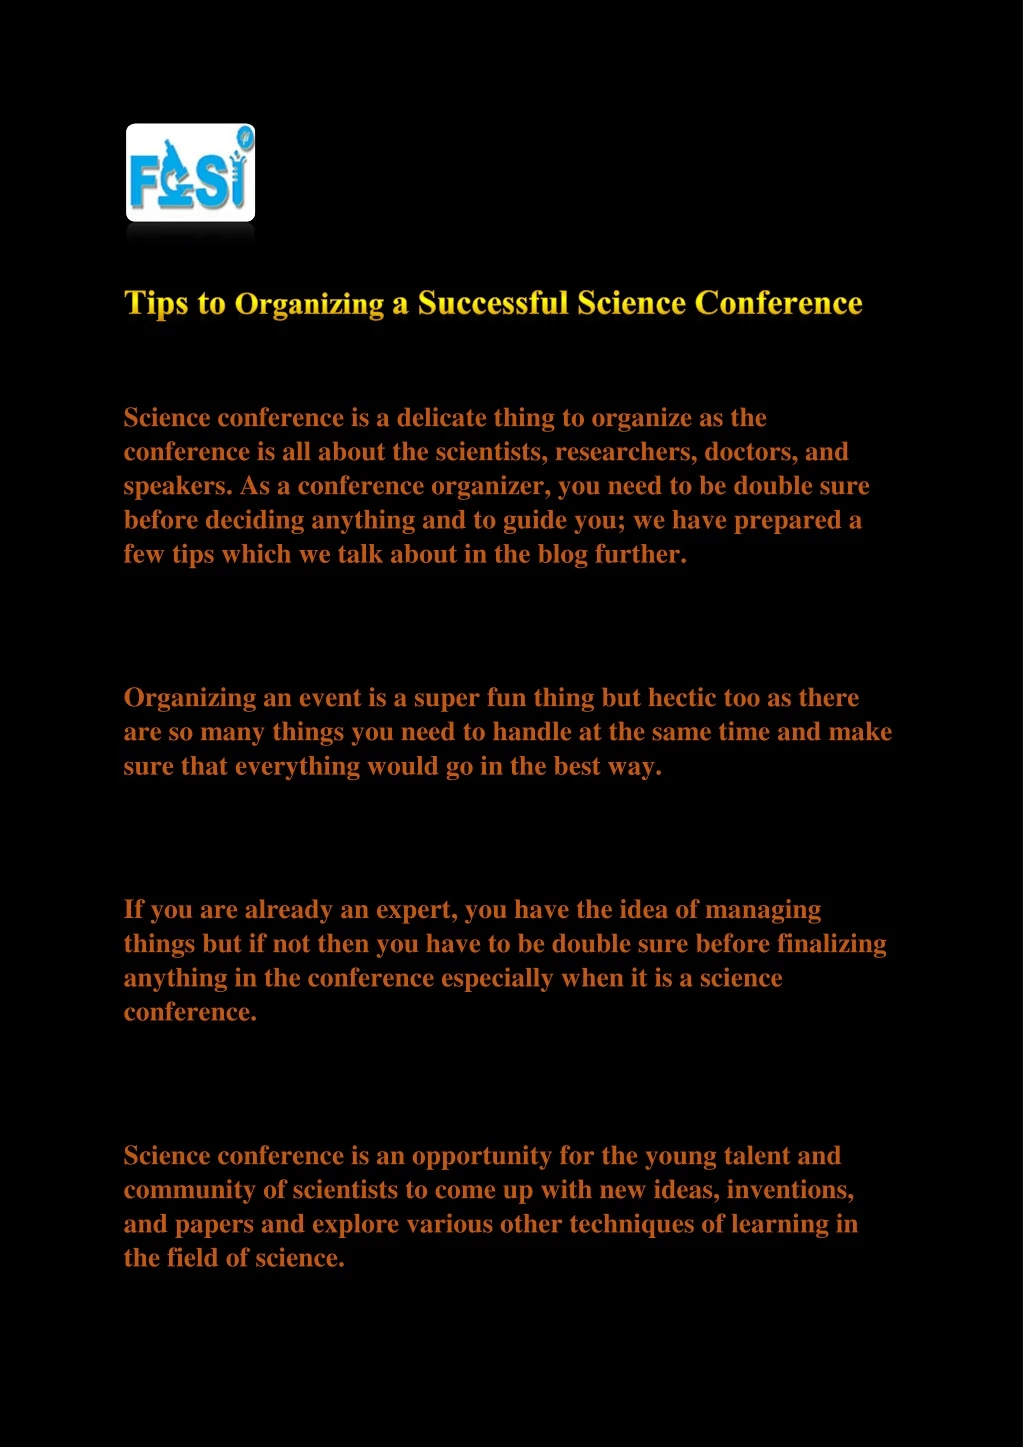 science conference is a delicate thing